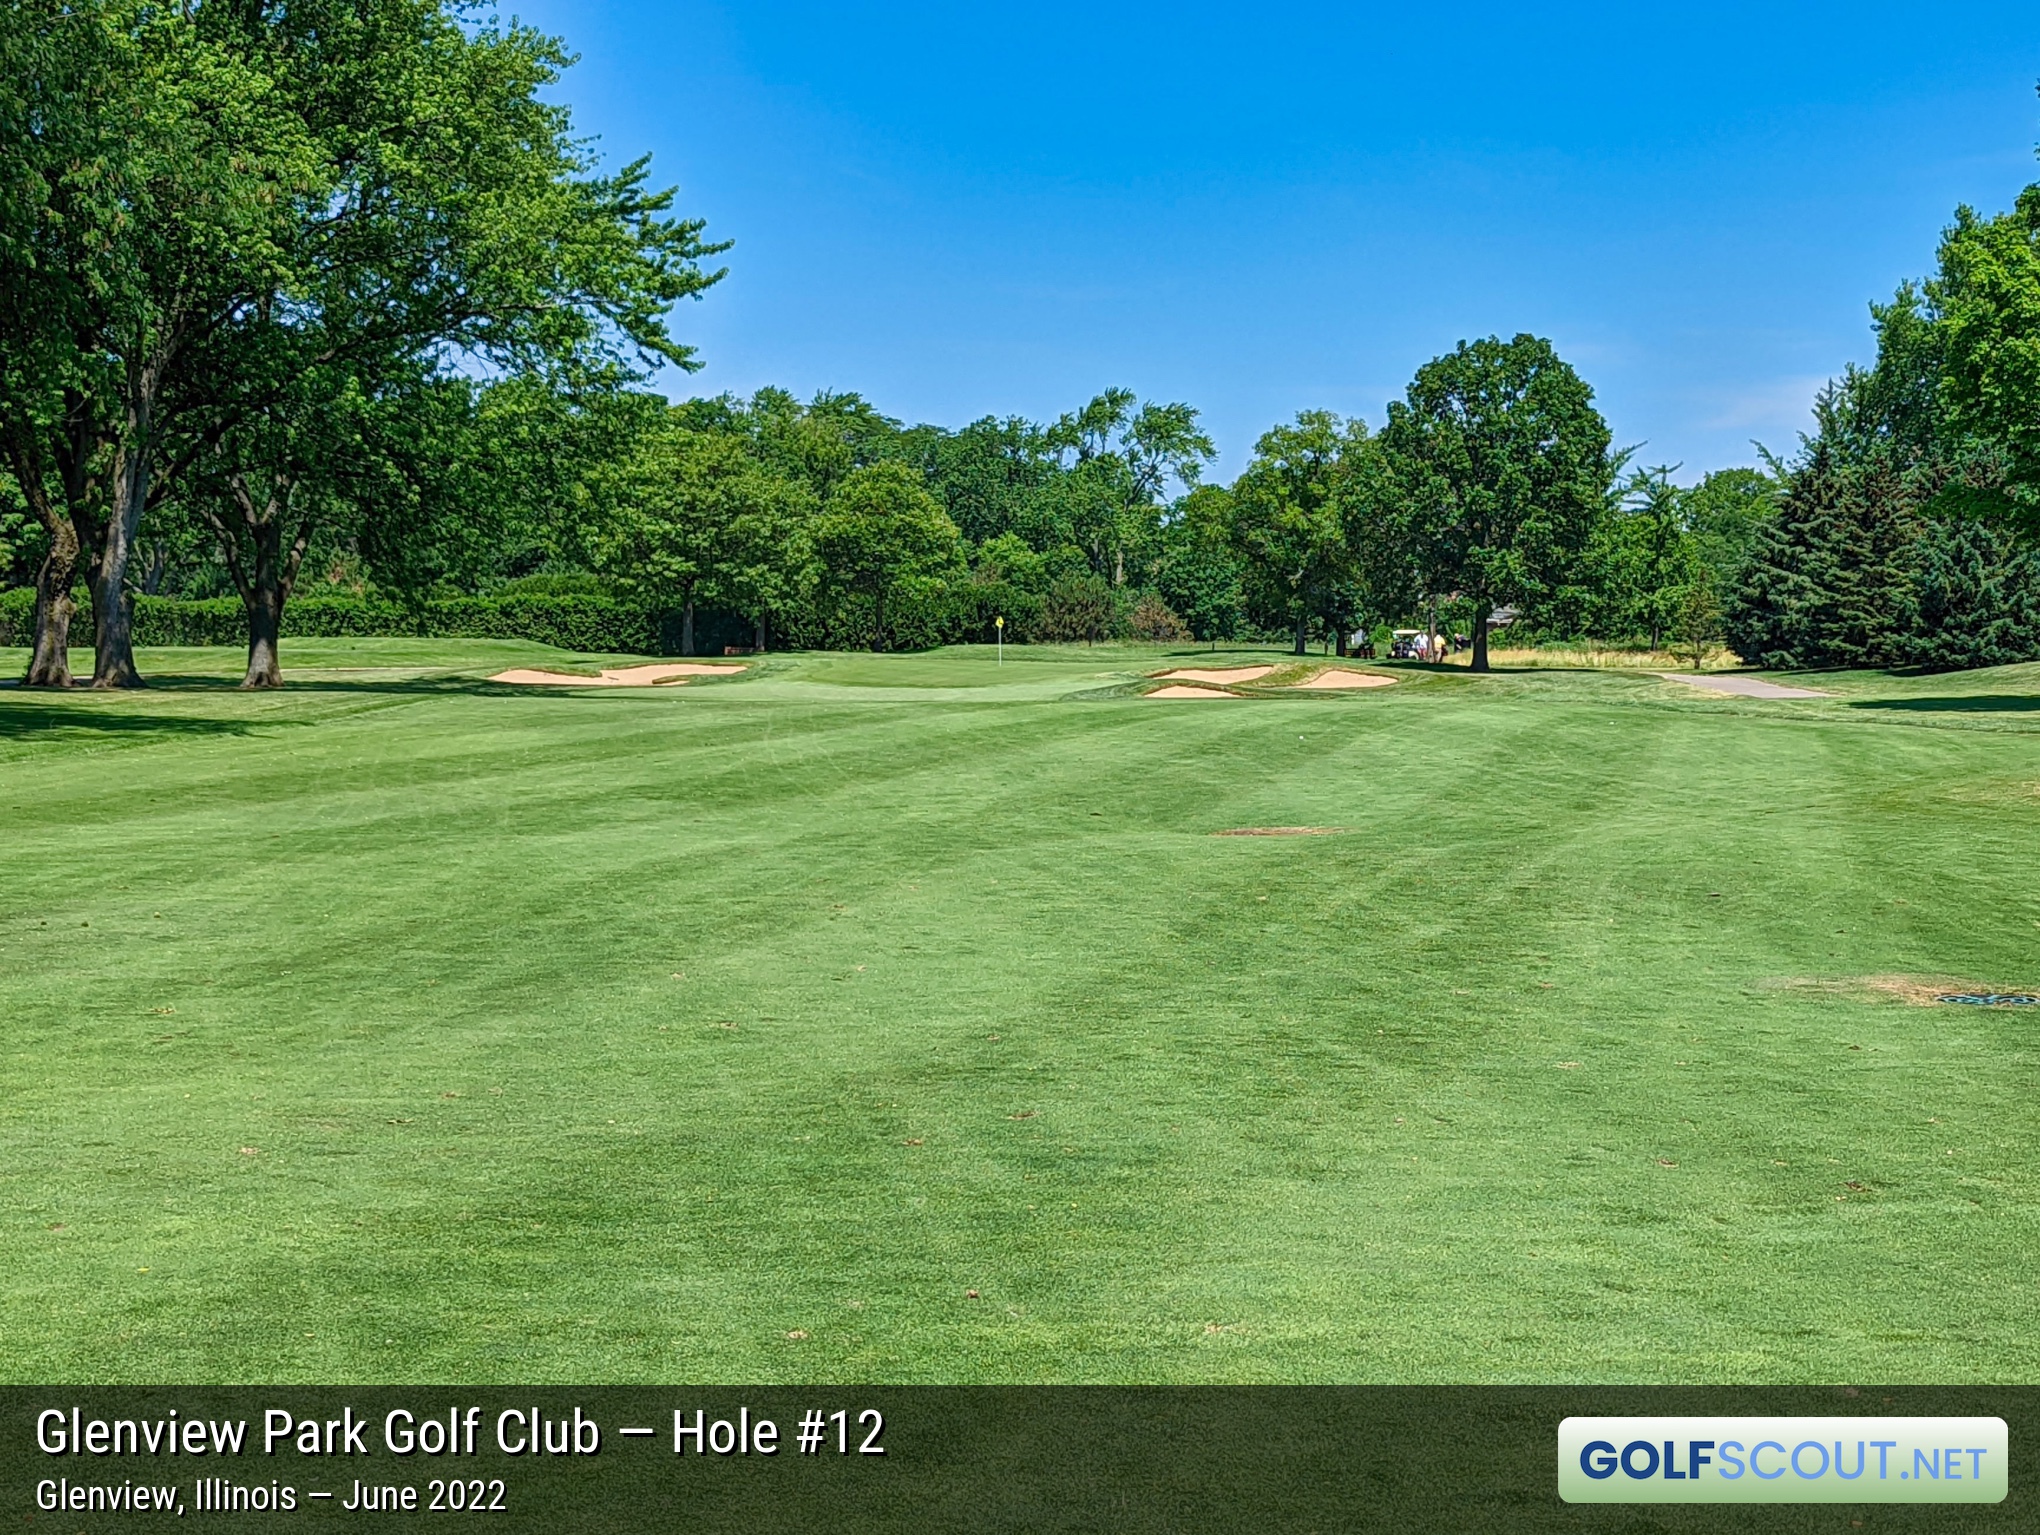 Photo of hole #12 at Glenview Park Golf Club in Glenview, Illinois. 